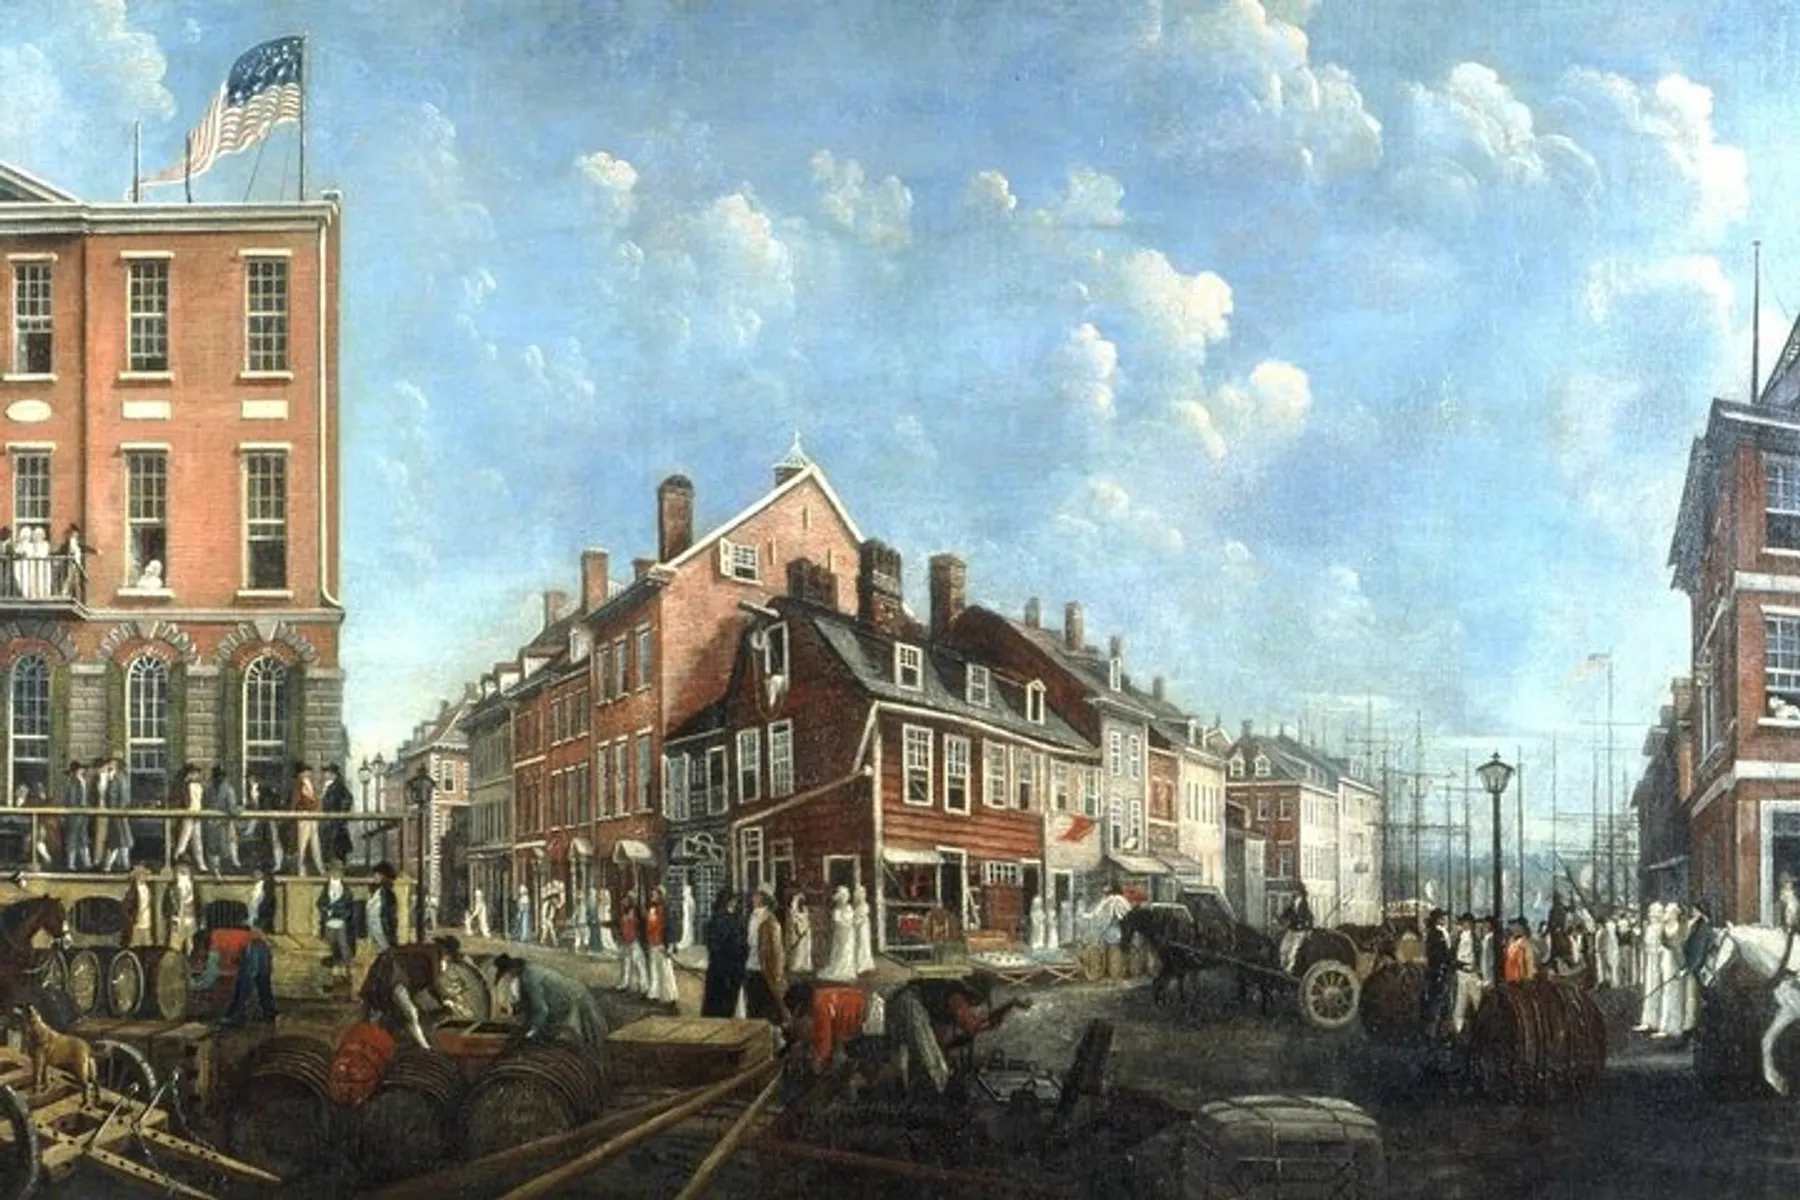 The image depicts a bustling colonial American street scene with people in period attire, carts, barrels, and a building flying an early American flag.